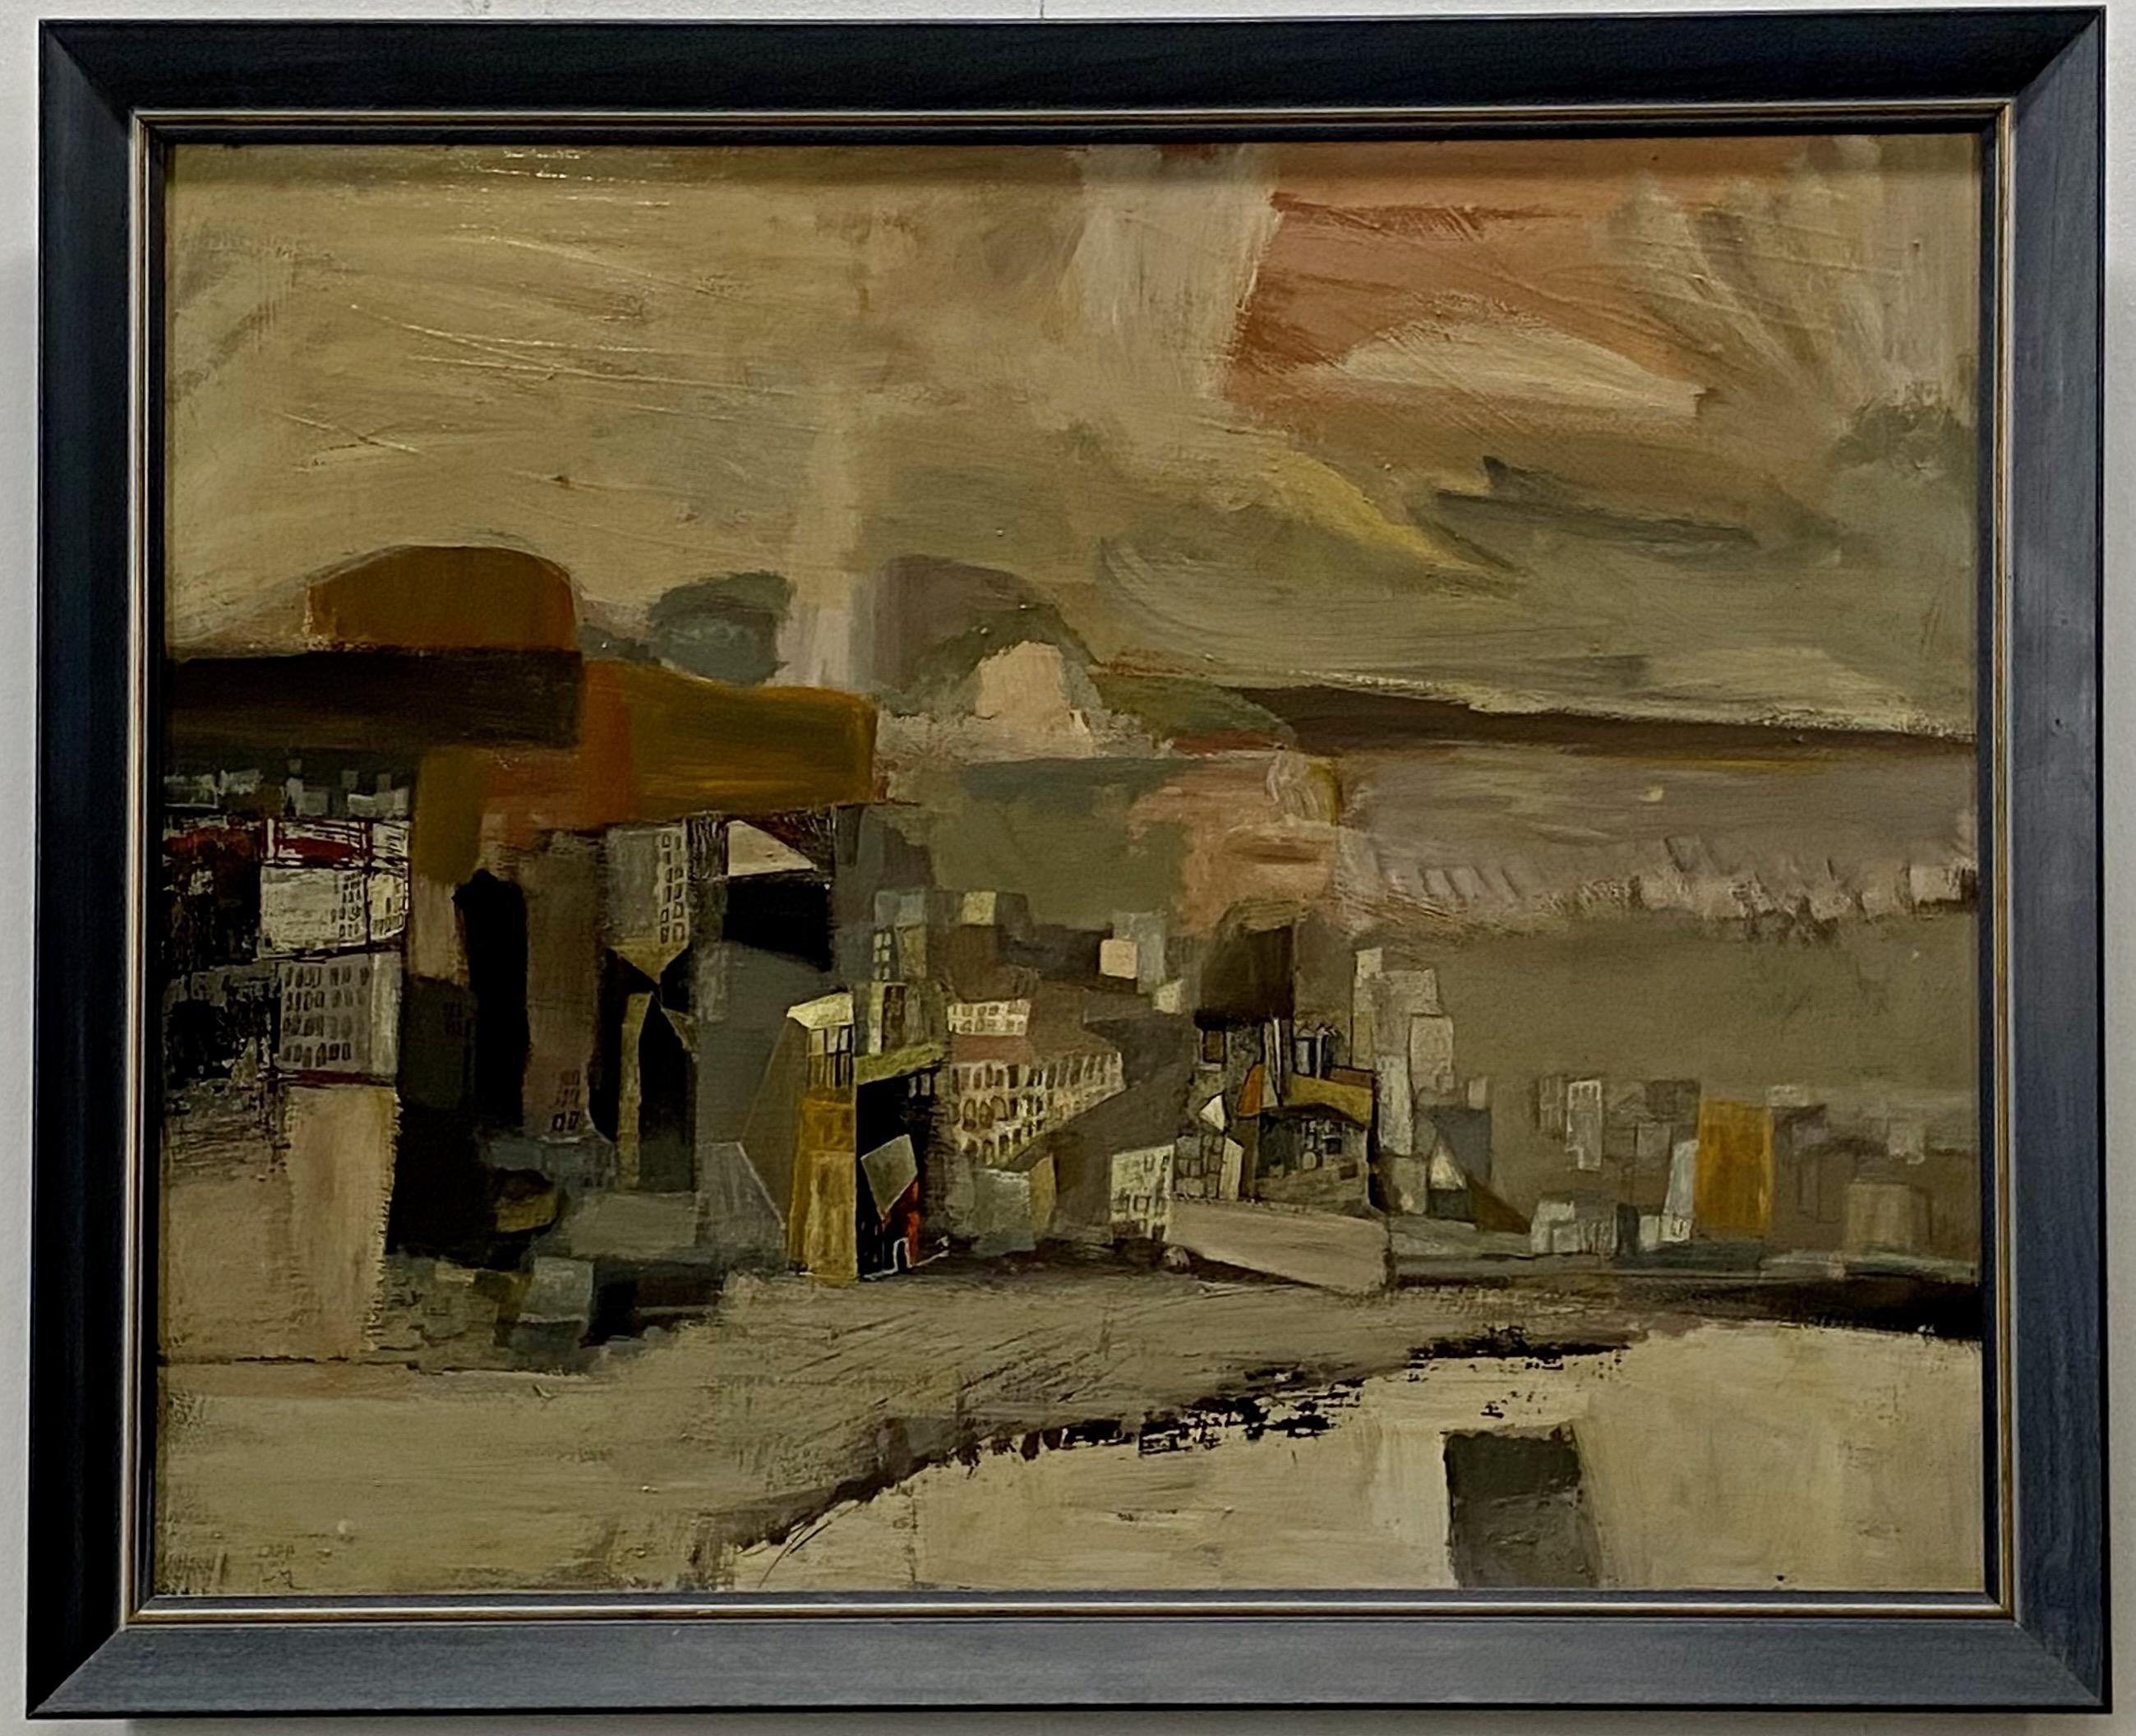 Modernist abstract cityscape painting by California artist Maurice Lapp.
Framed oil on masonite.
American, mid 20th century 1960's-1970's.
Maurice Lapp (Born 1925) was active/lived in California, Illinois.